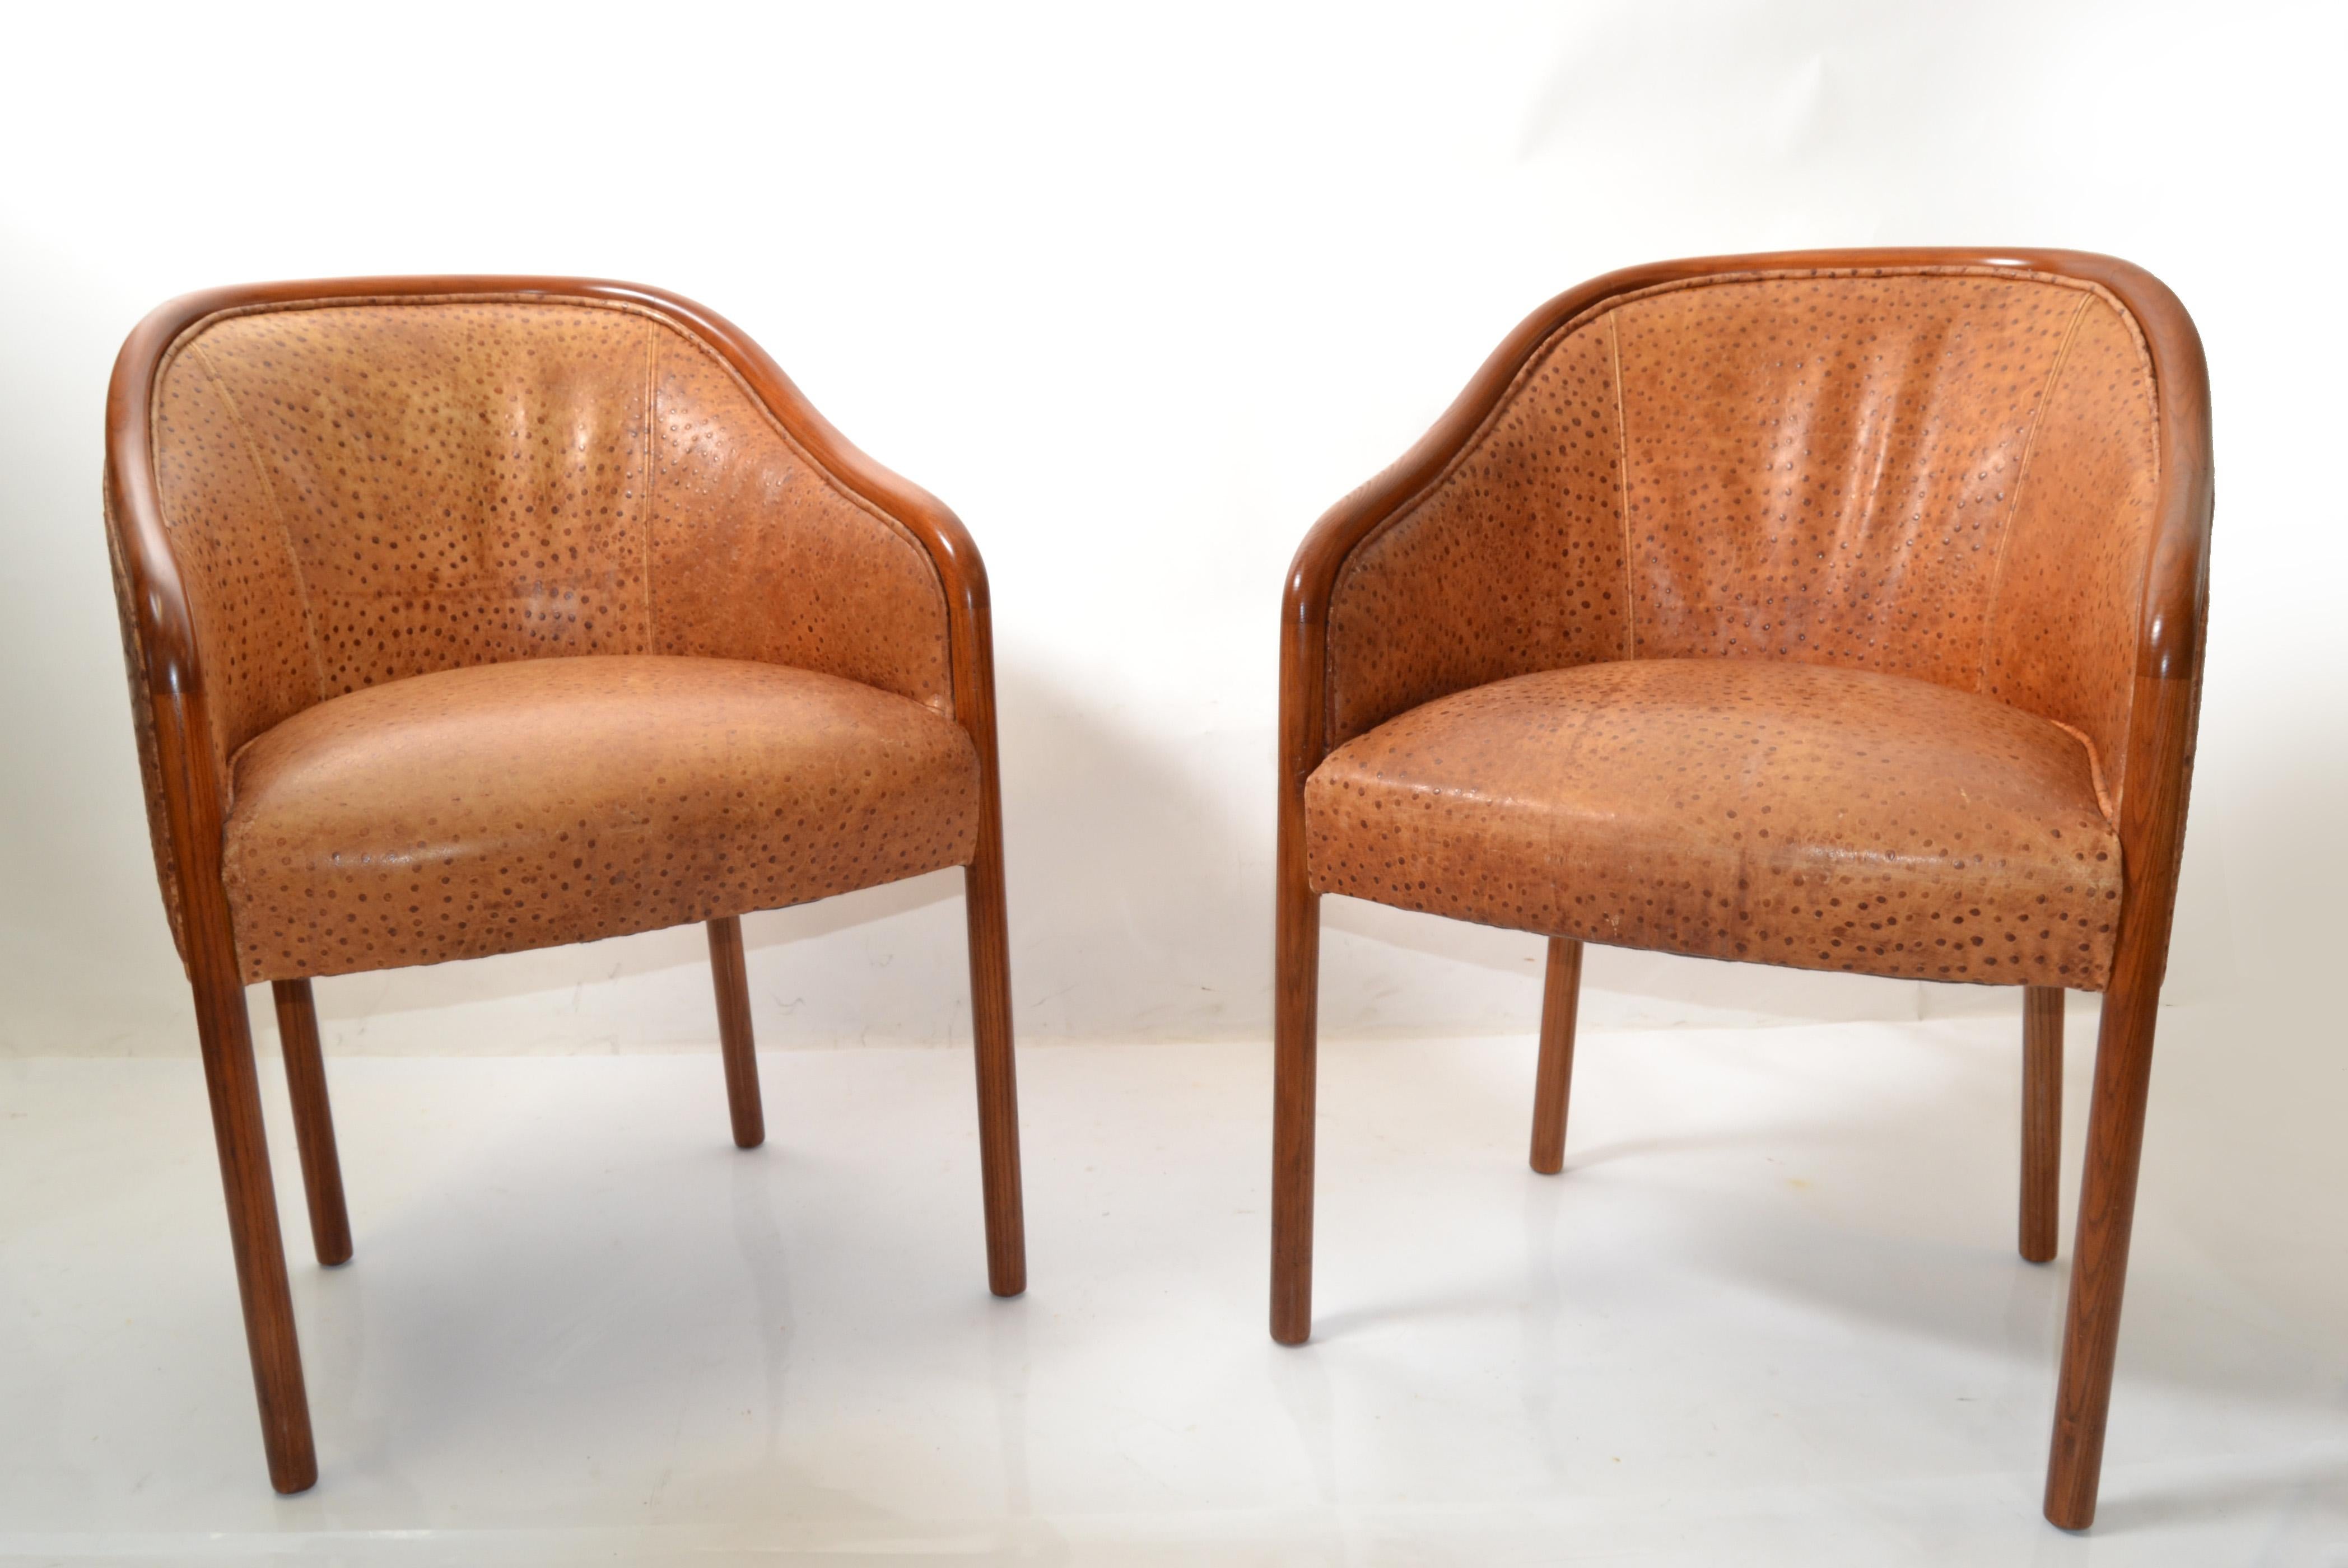 Rare find this pair of Ward Bennet oak armchairs with the original cognac brown Ostrich leather upholstery made by Brickel Associates in the late 1970.
The oak wood frames have been refinished and the leather shows some age related scratches and